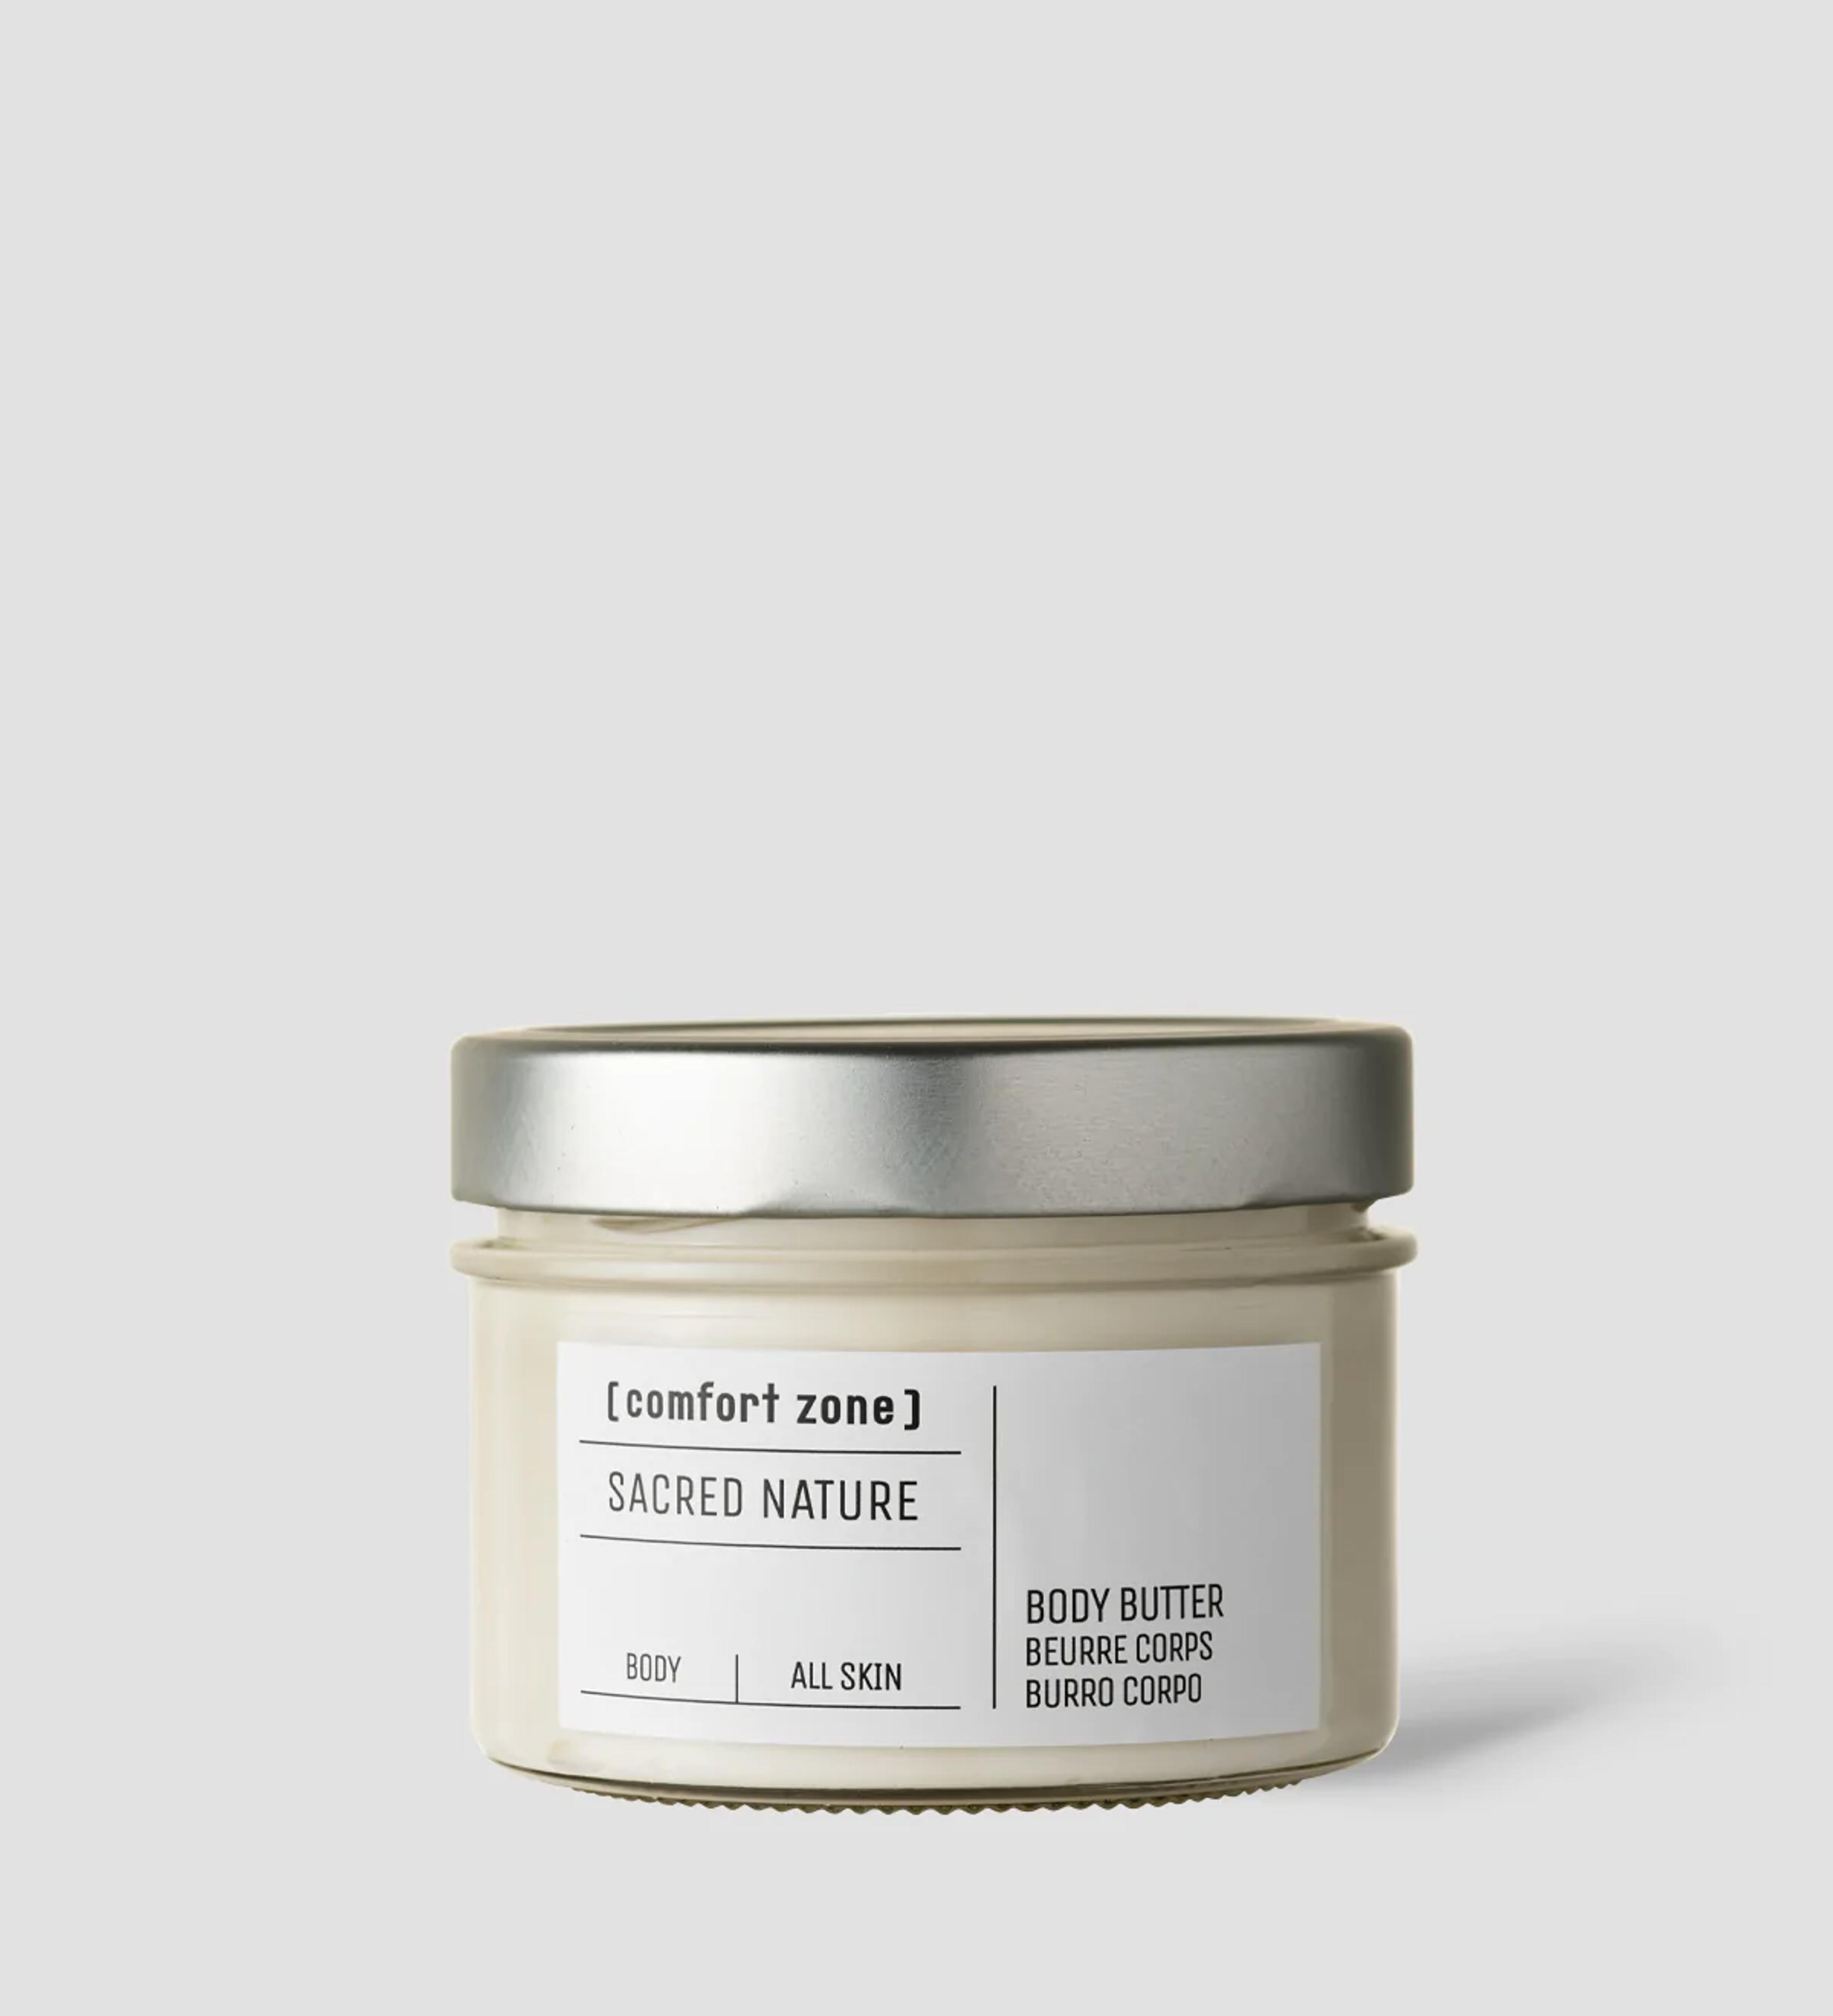 Organic Body Butter | Sacred Nature Body Butter - Comfort Zone US